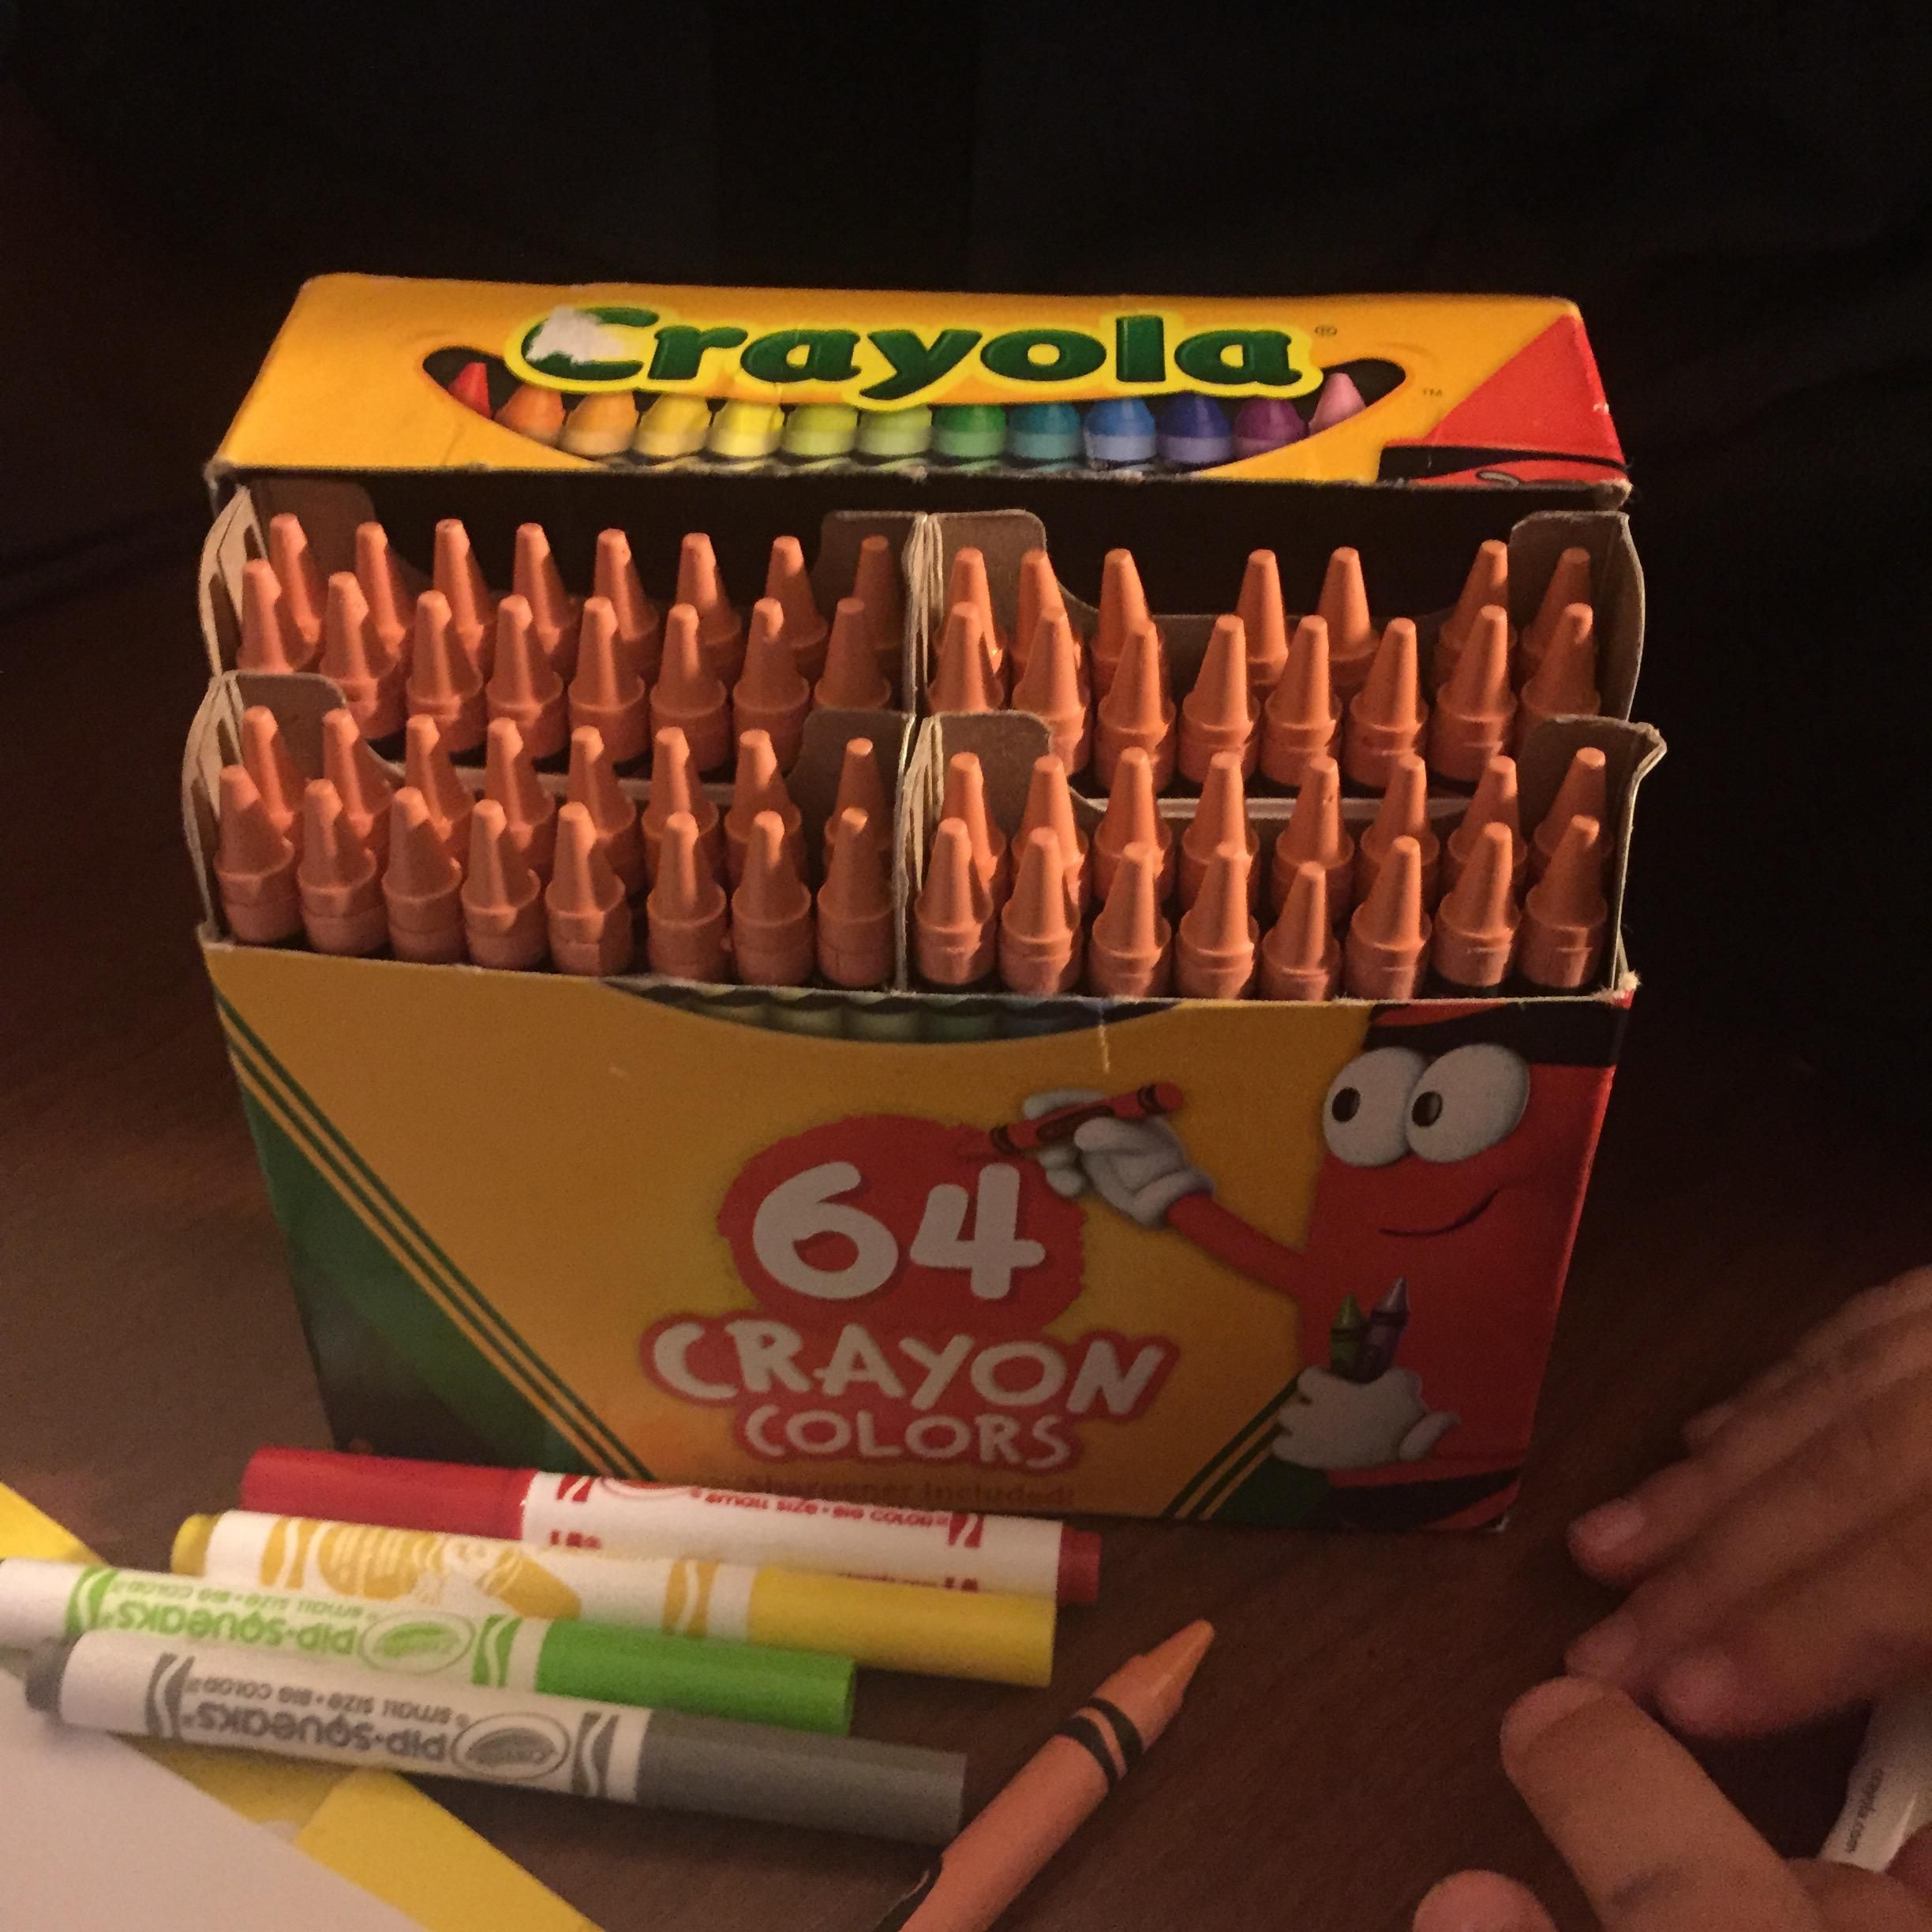 My sister bought a box of crayons, and they were all peach